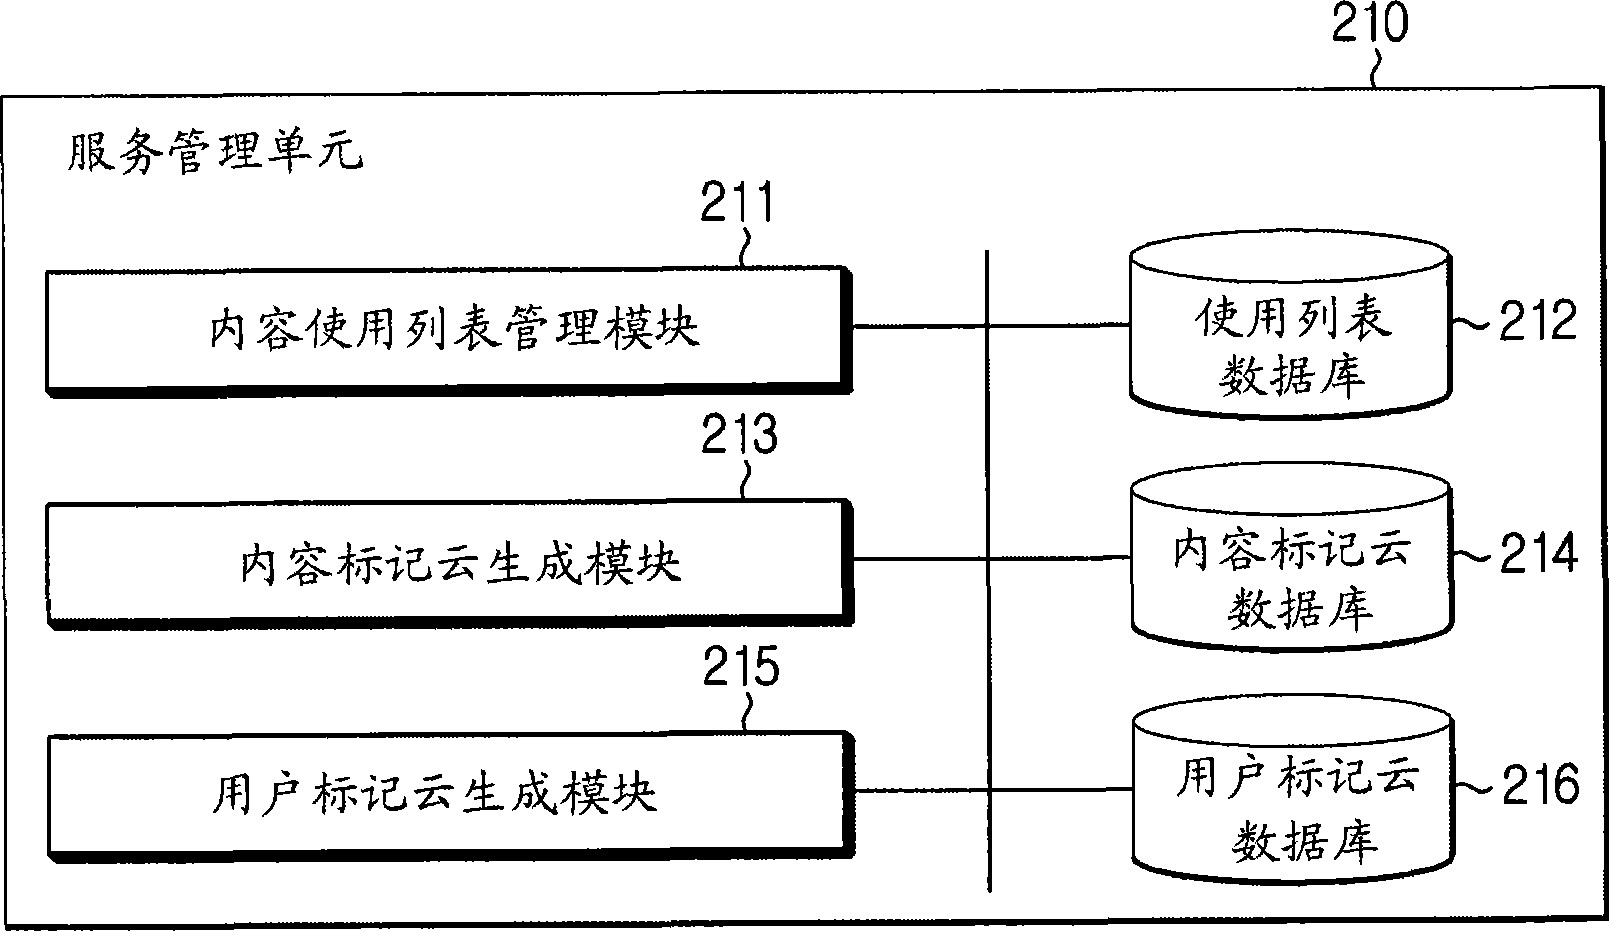 Content recommendation apparatus and method using tag cloud